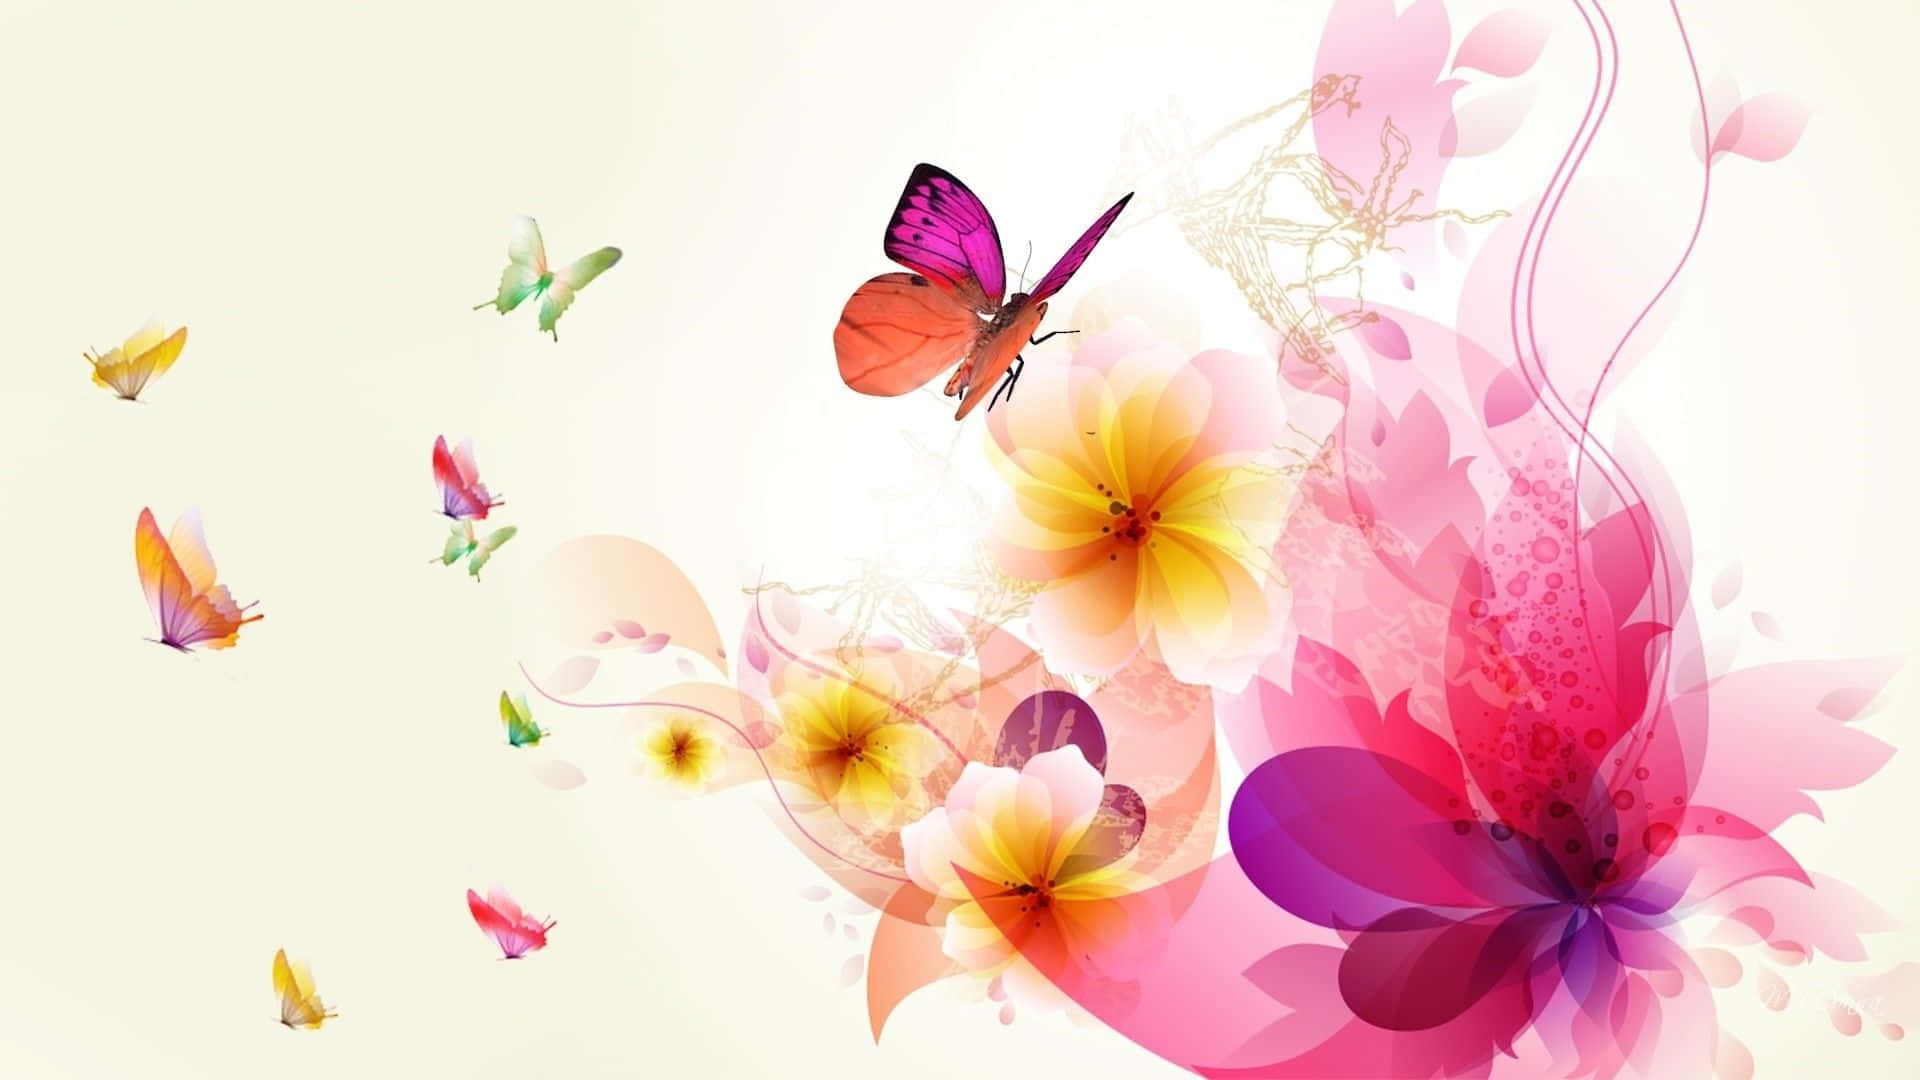 Colorful Floral Explosion: A masterpiece of vivid flowers in bloom Wallpaper